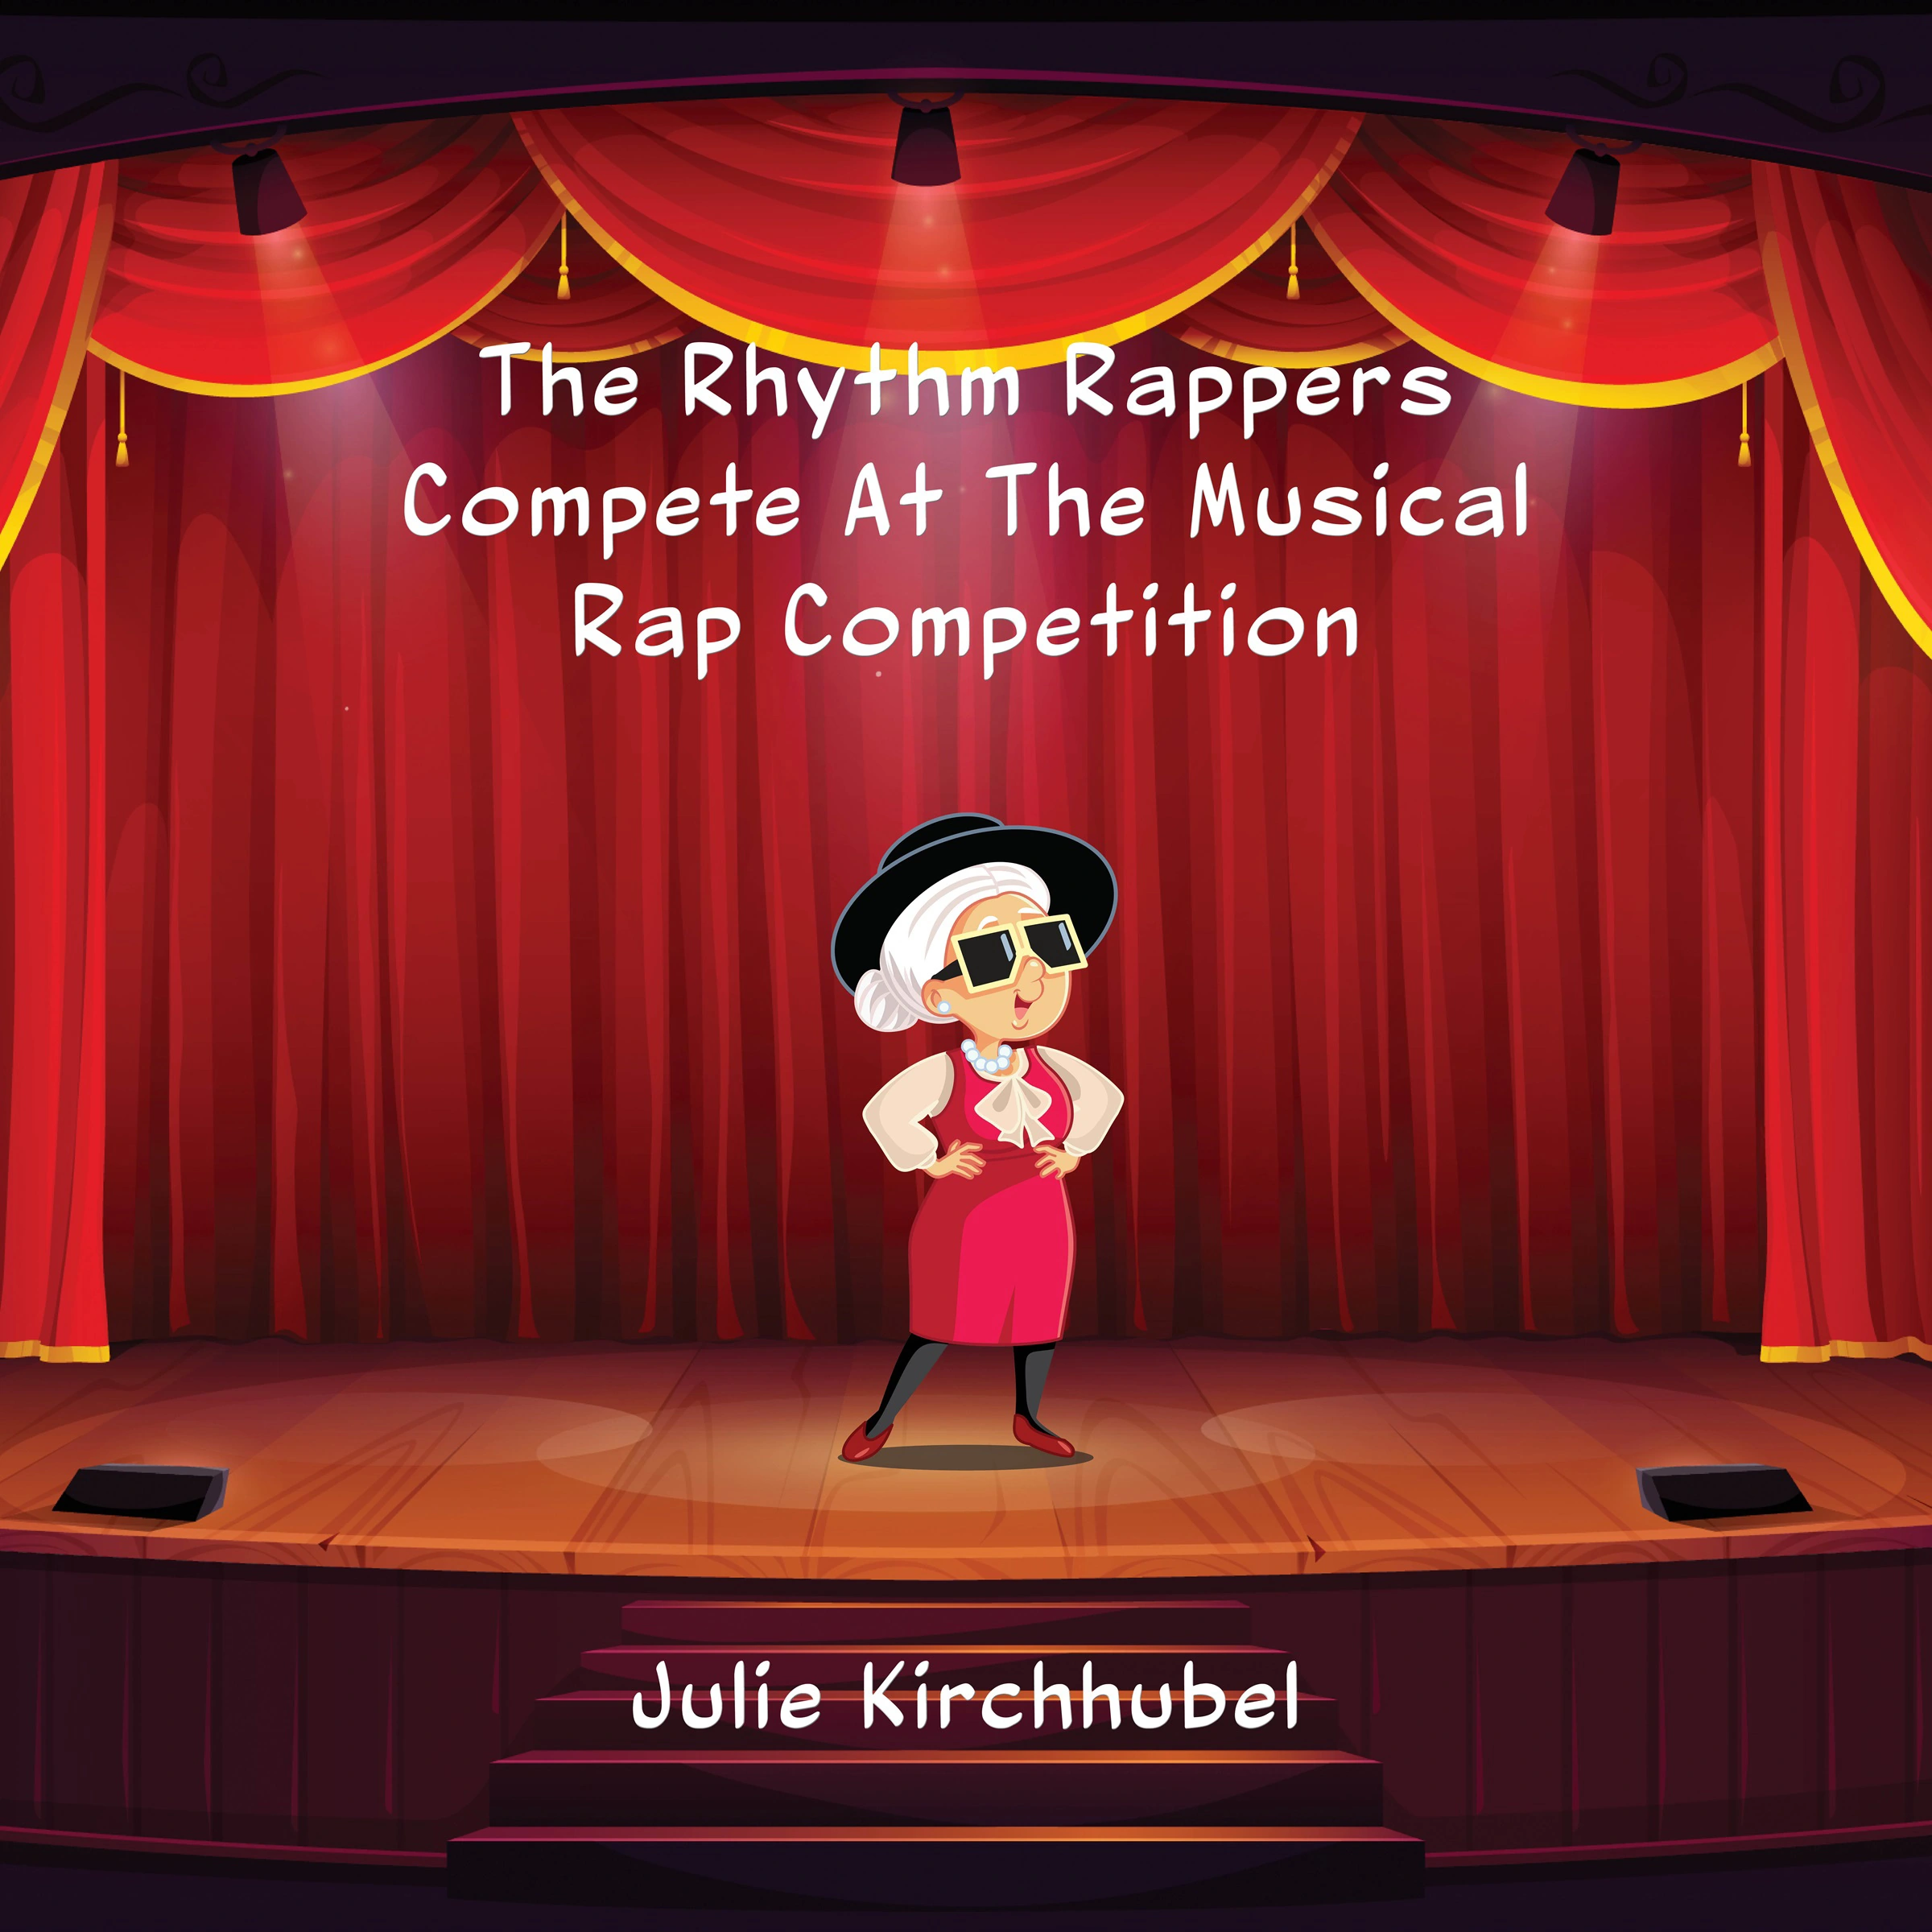 The Rhythm Rappers Compete At The Musical Rap Competition Audiobook by Julie Kirchhubel